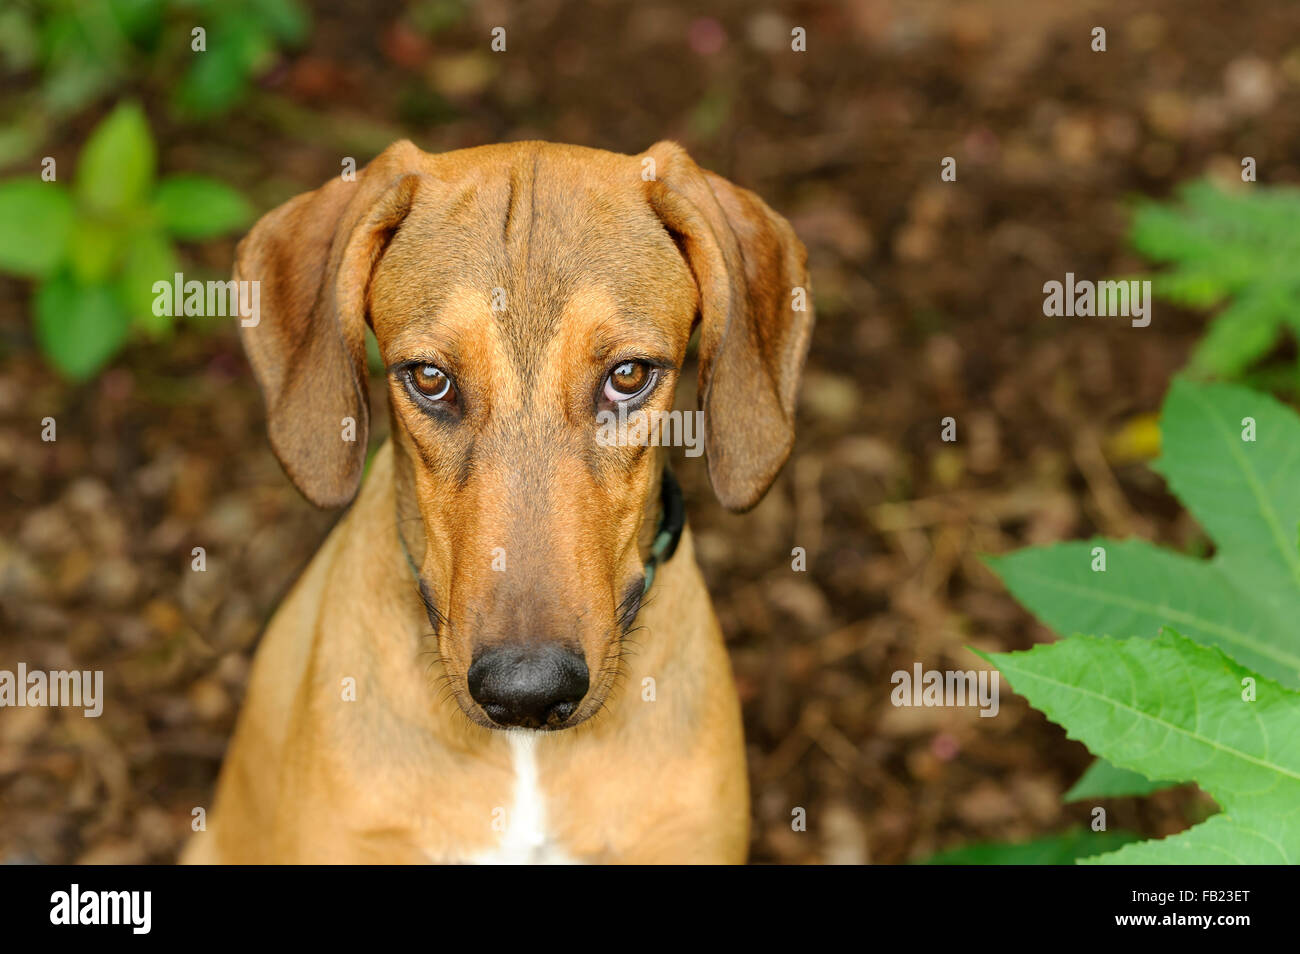 Sad dog is a beautiful golden brown dog looking up at the camera with big soft brown sad eyes. Stock Photo